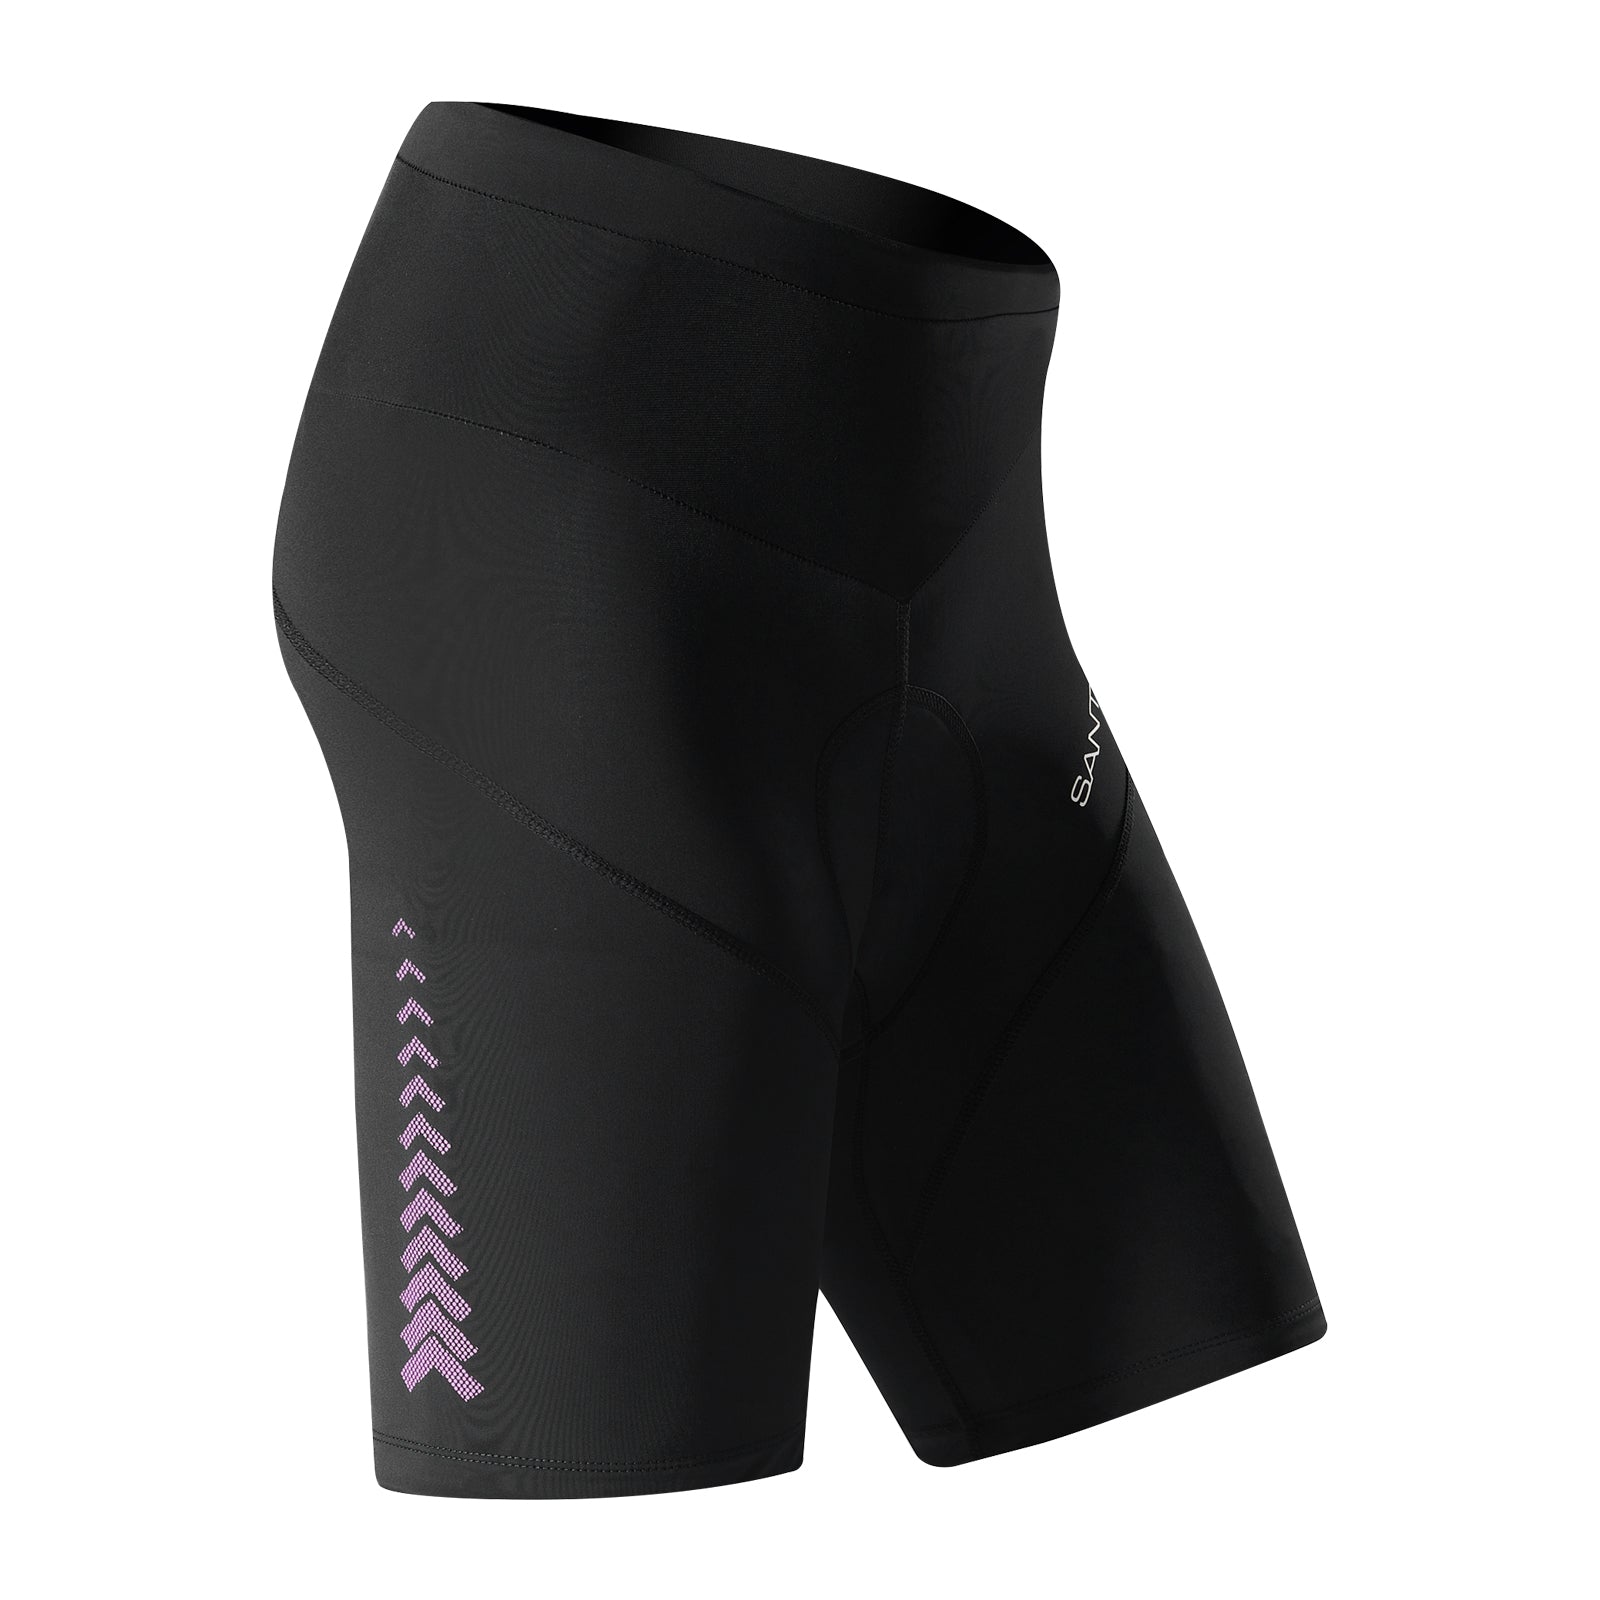  Santic Cycling Shorts with Padded Women 5 Inseam Bike Short  Cross Waist Athletic Underwear Indoor Spin Endurance Black XS : Clothing,  Shoes & Jewelry